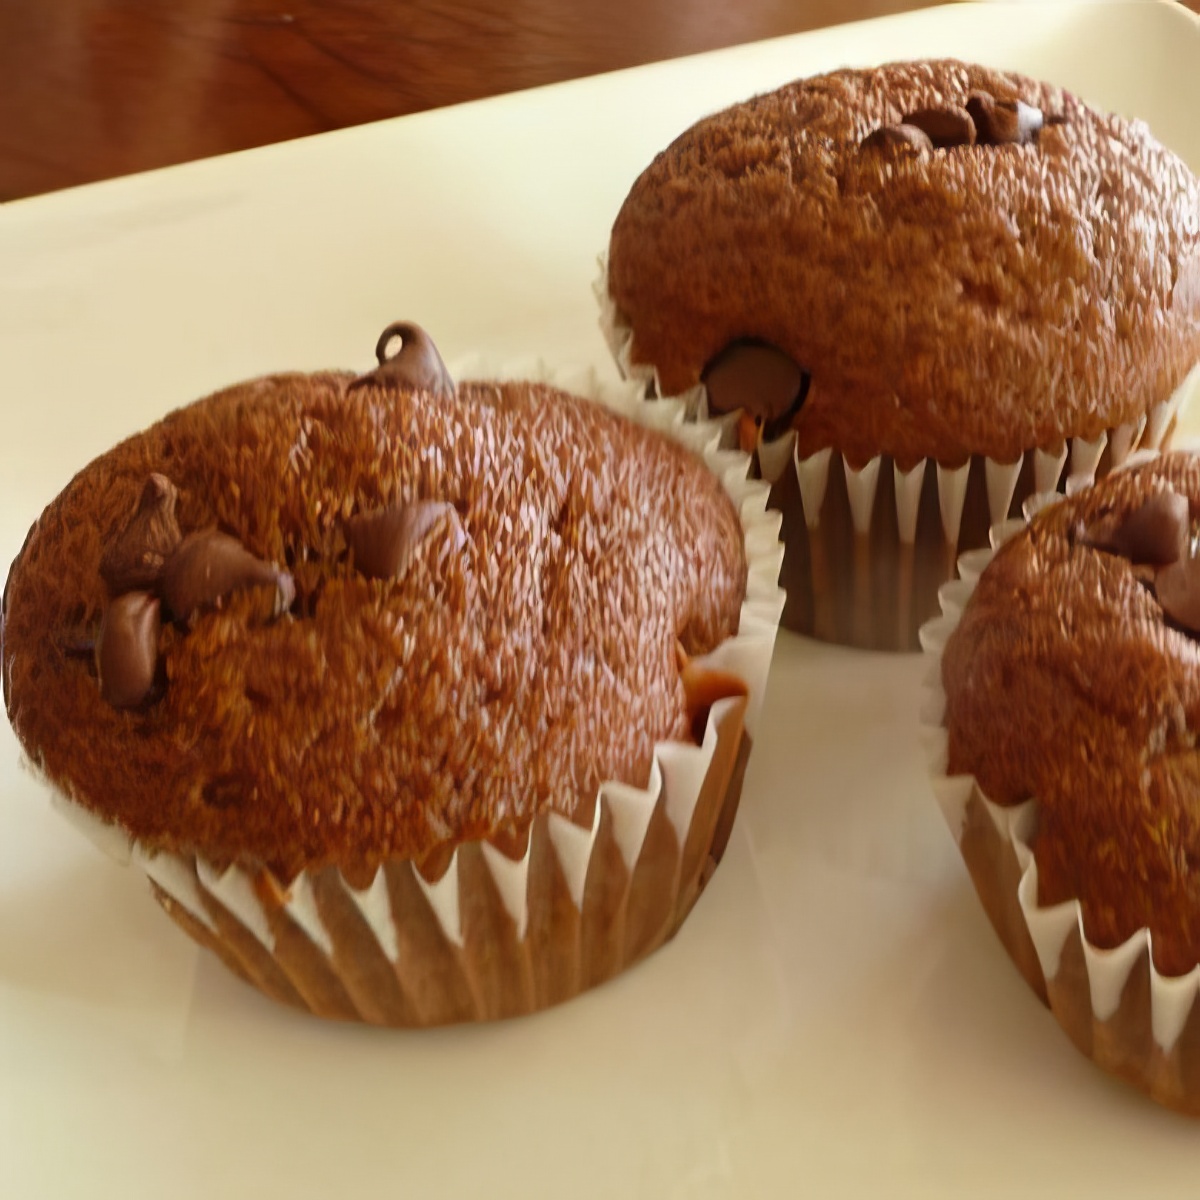 Muffins for the win as you try this muffin bread recipe with the whole family!